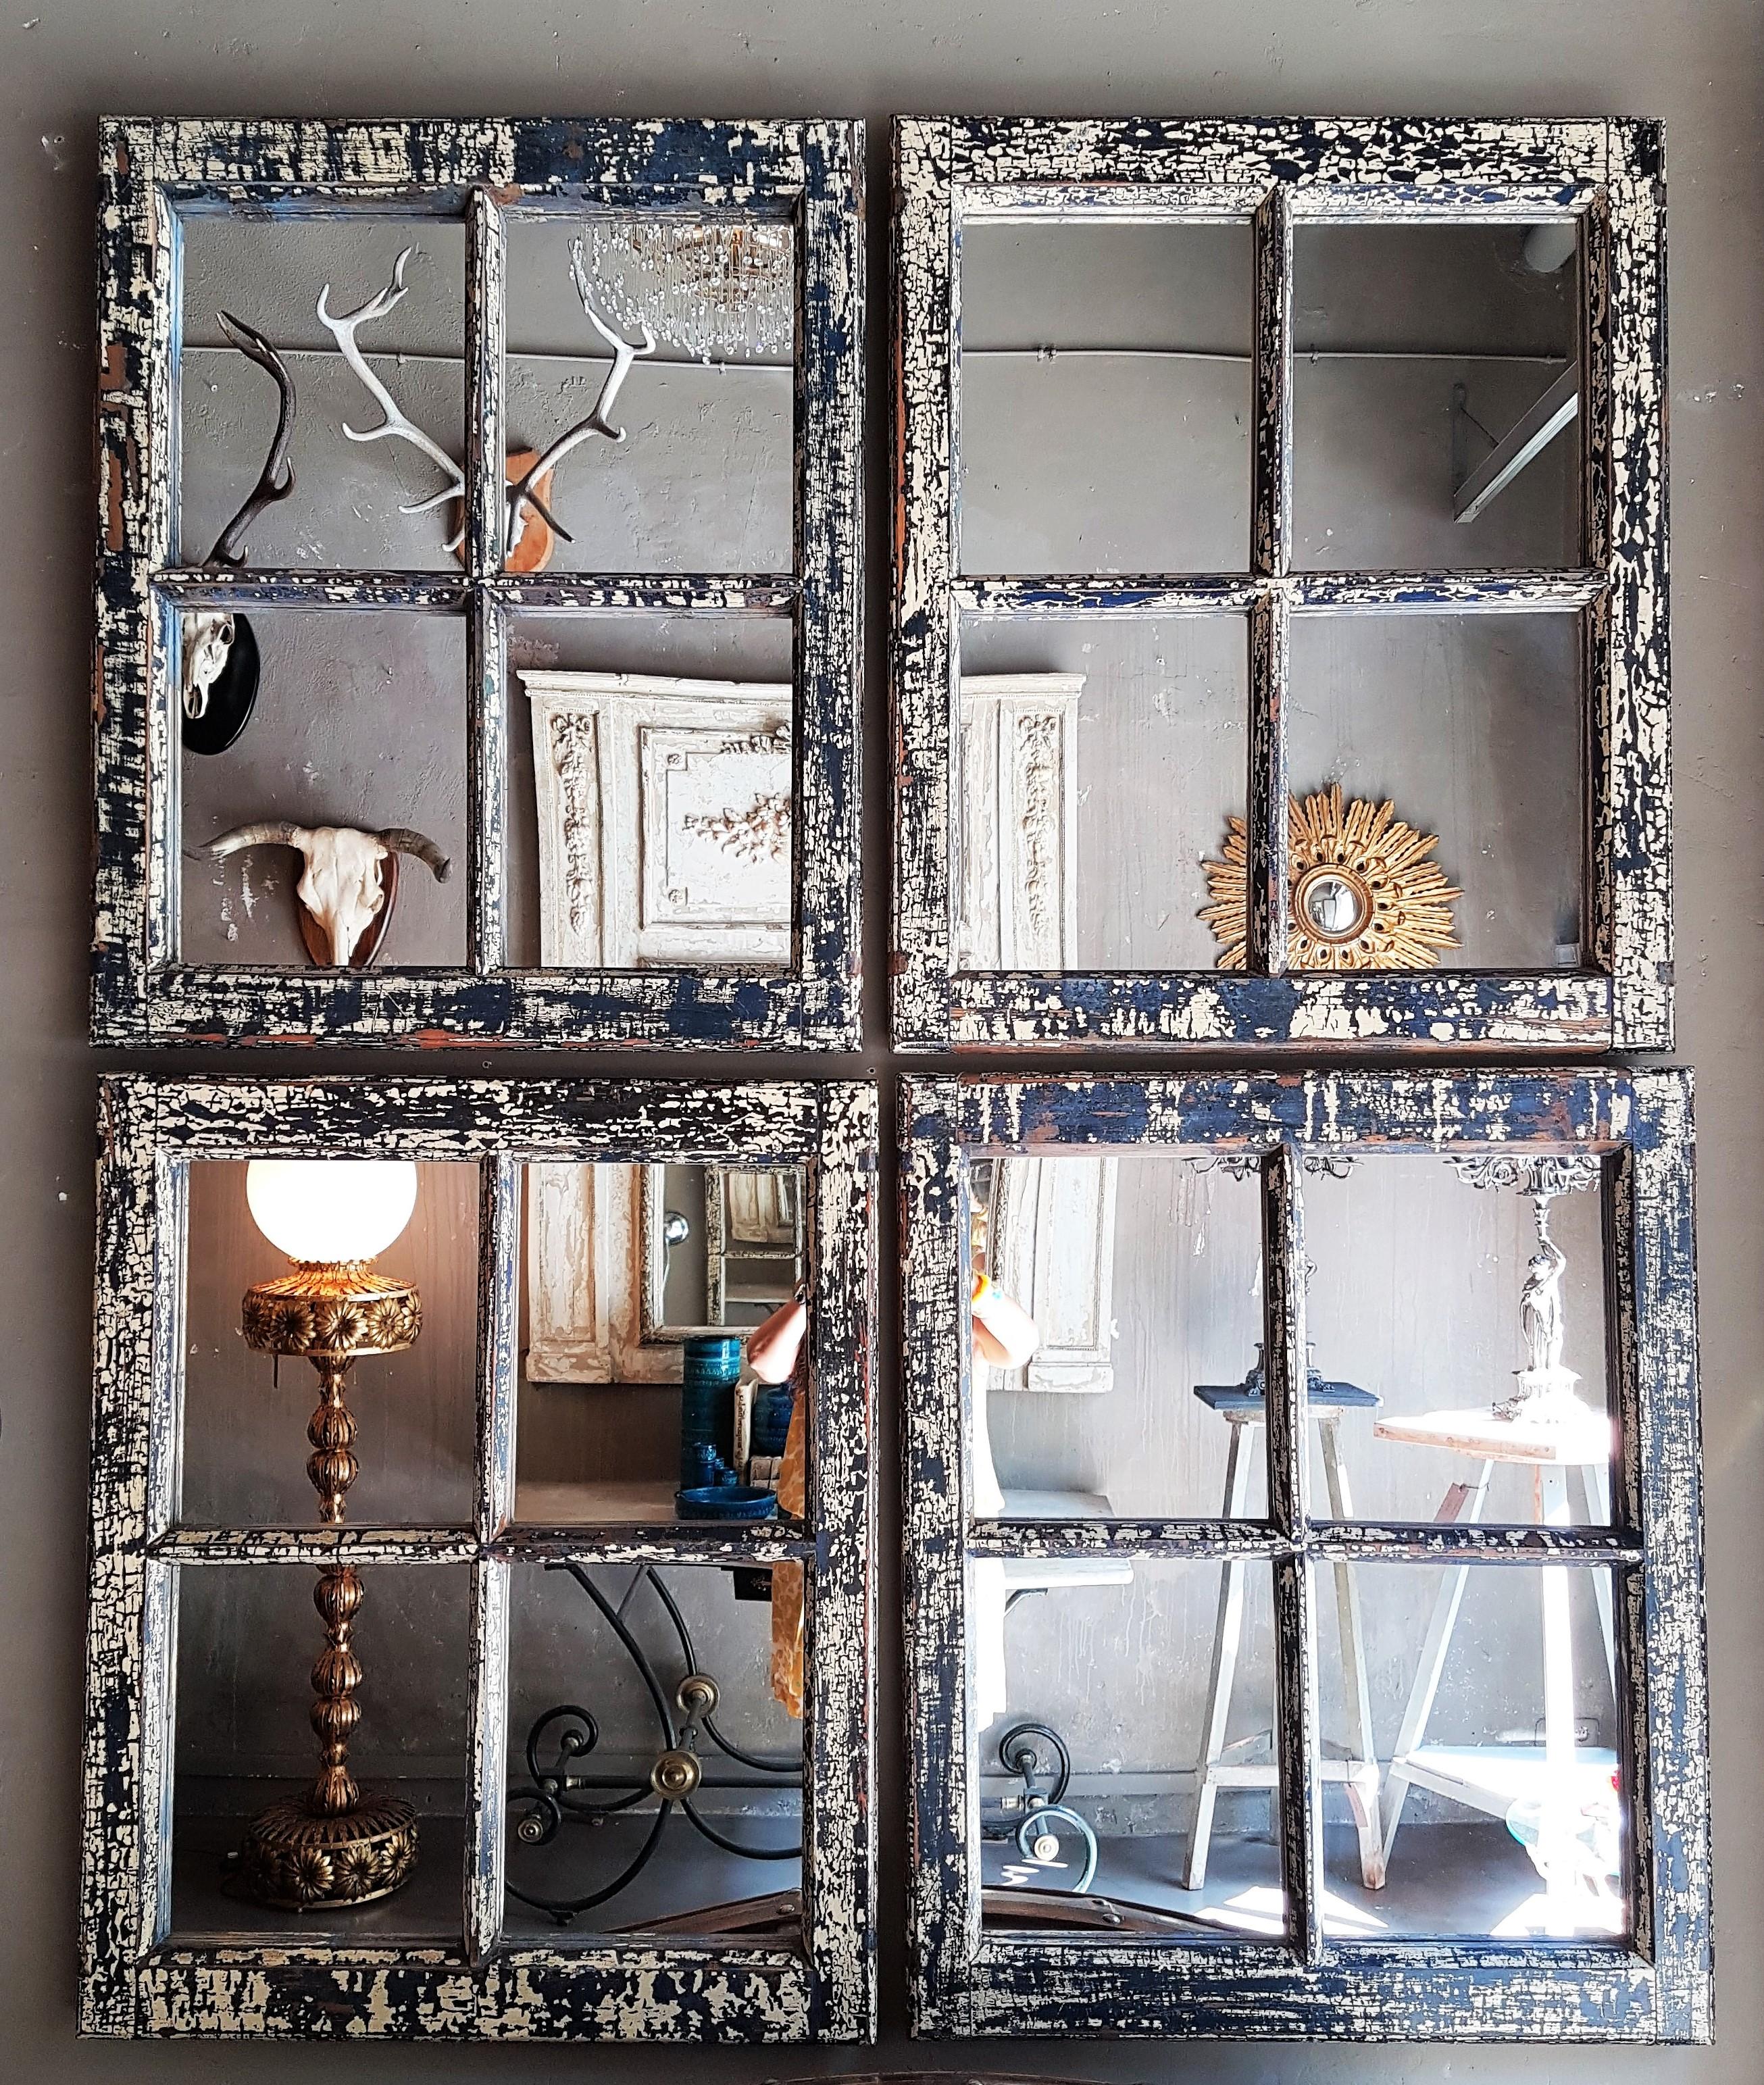 Set of Four Classic Blue and Ecru Patina Industrial Wooden Window Frame Mirrors.  Spain, 19th century.
These wood window frames have an interesting original patina showing rests of different coats of paint,
All of them have their original colors